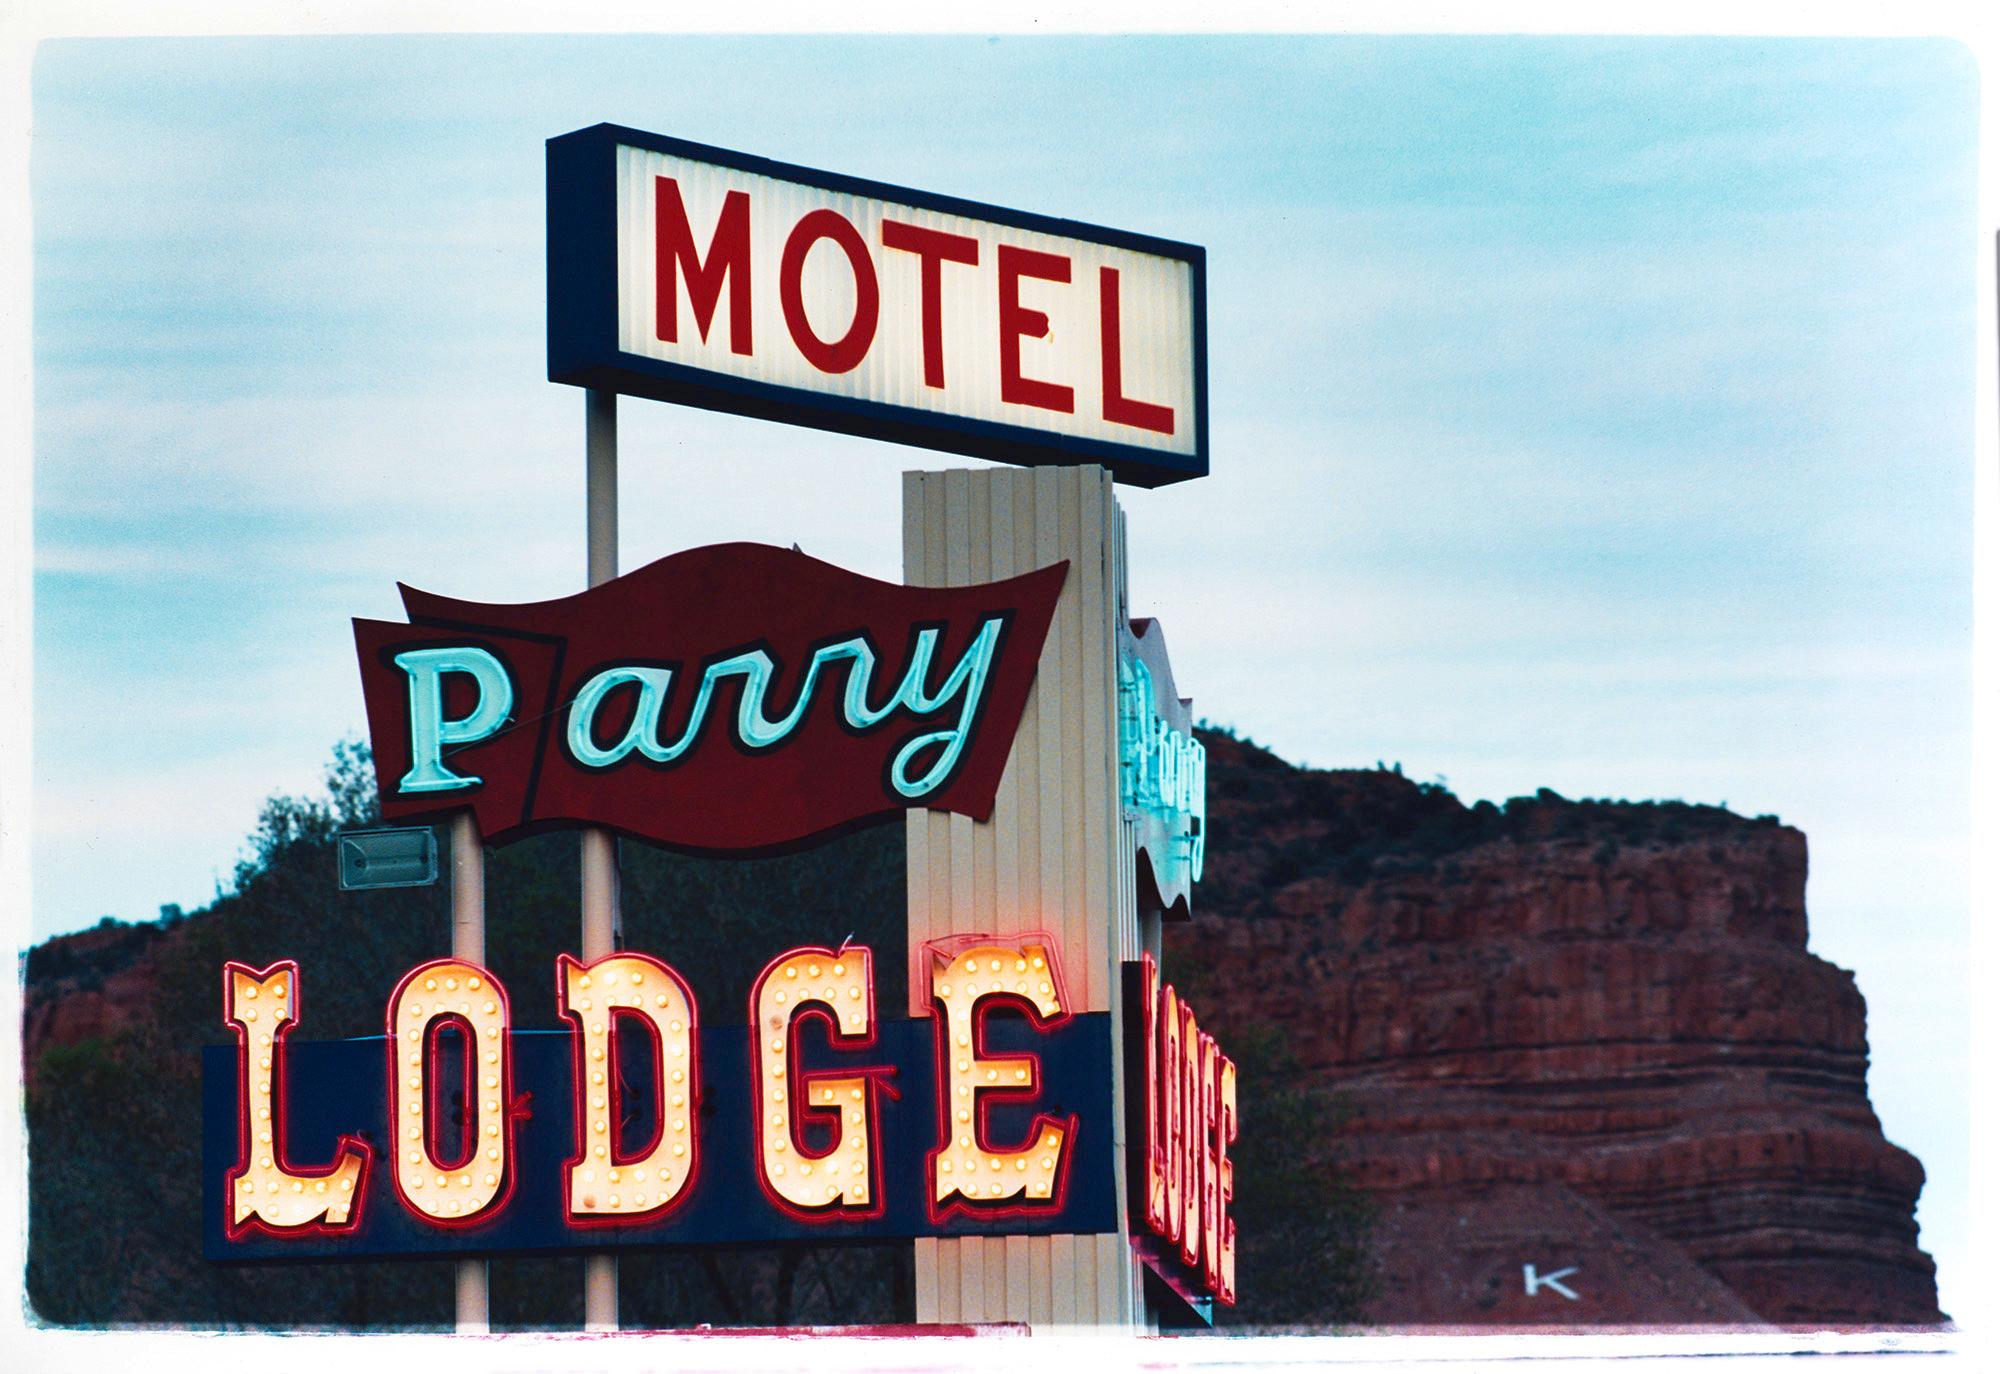 Parry Lodge, Kanab - Americana neon sign contemporary color photography